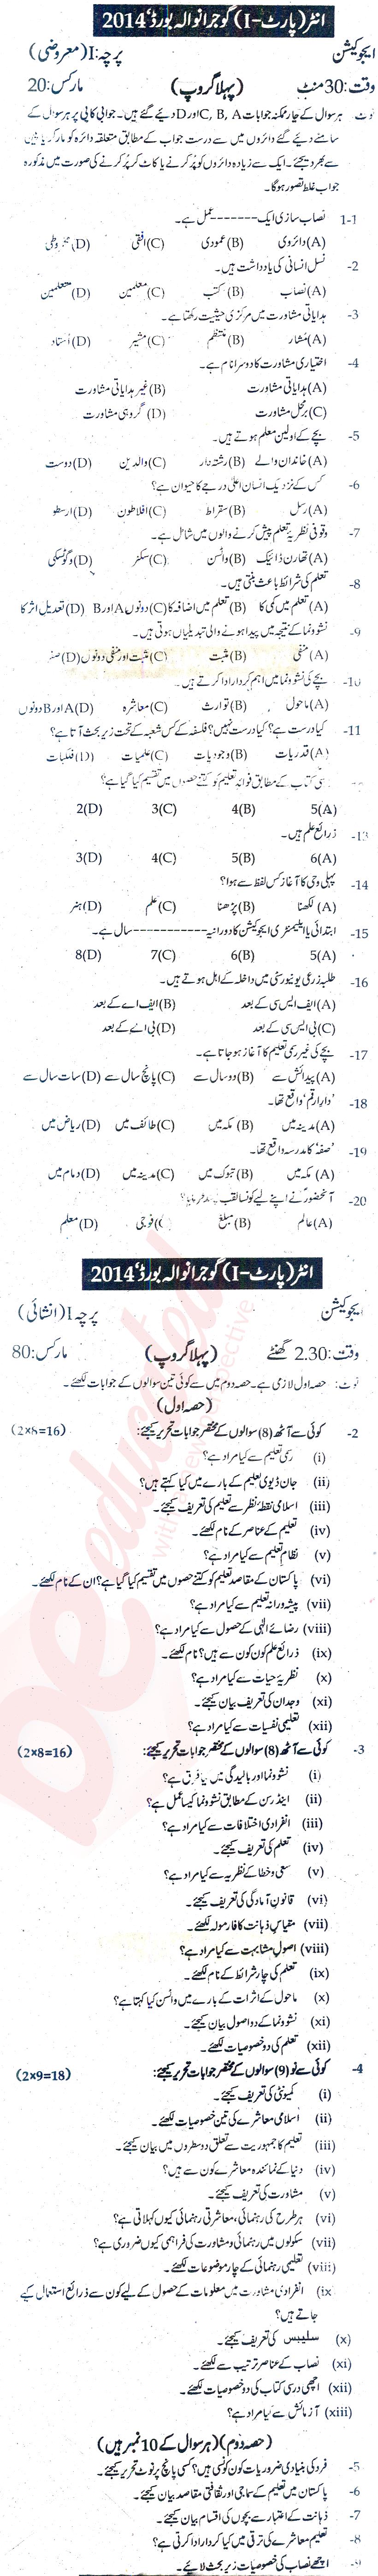 Education FA Part 1 Past Paper Group 1 BISE Gujranwala 2014